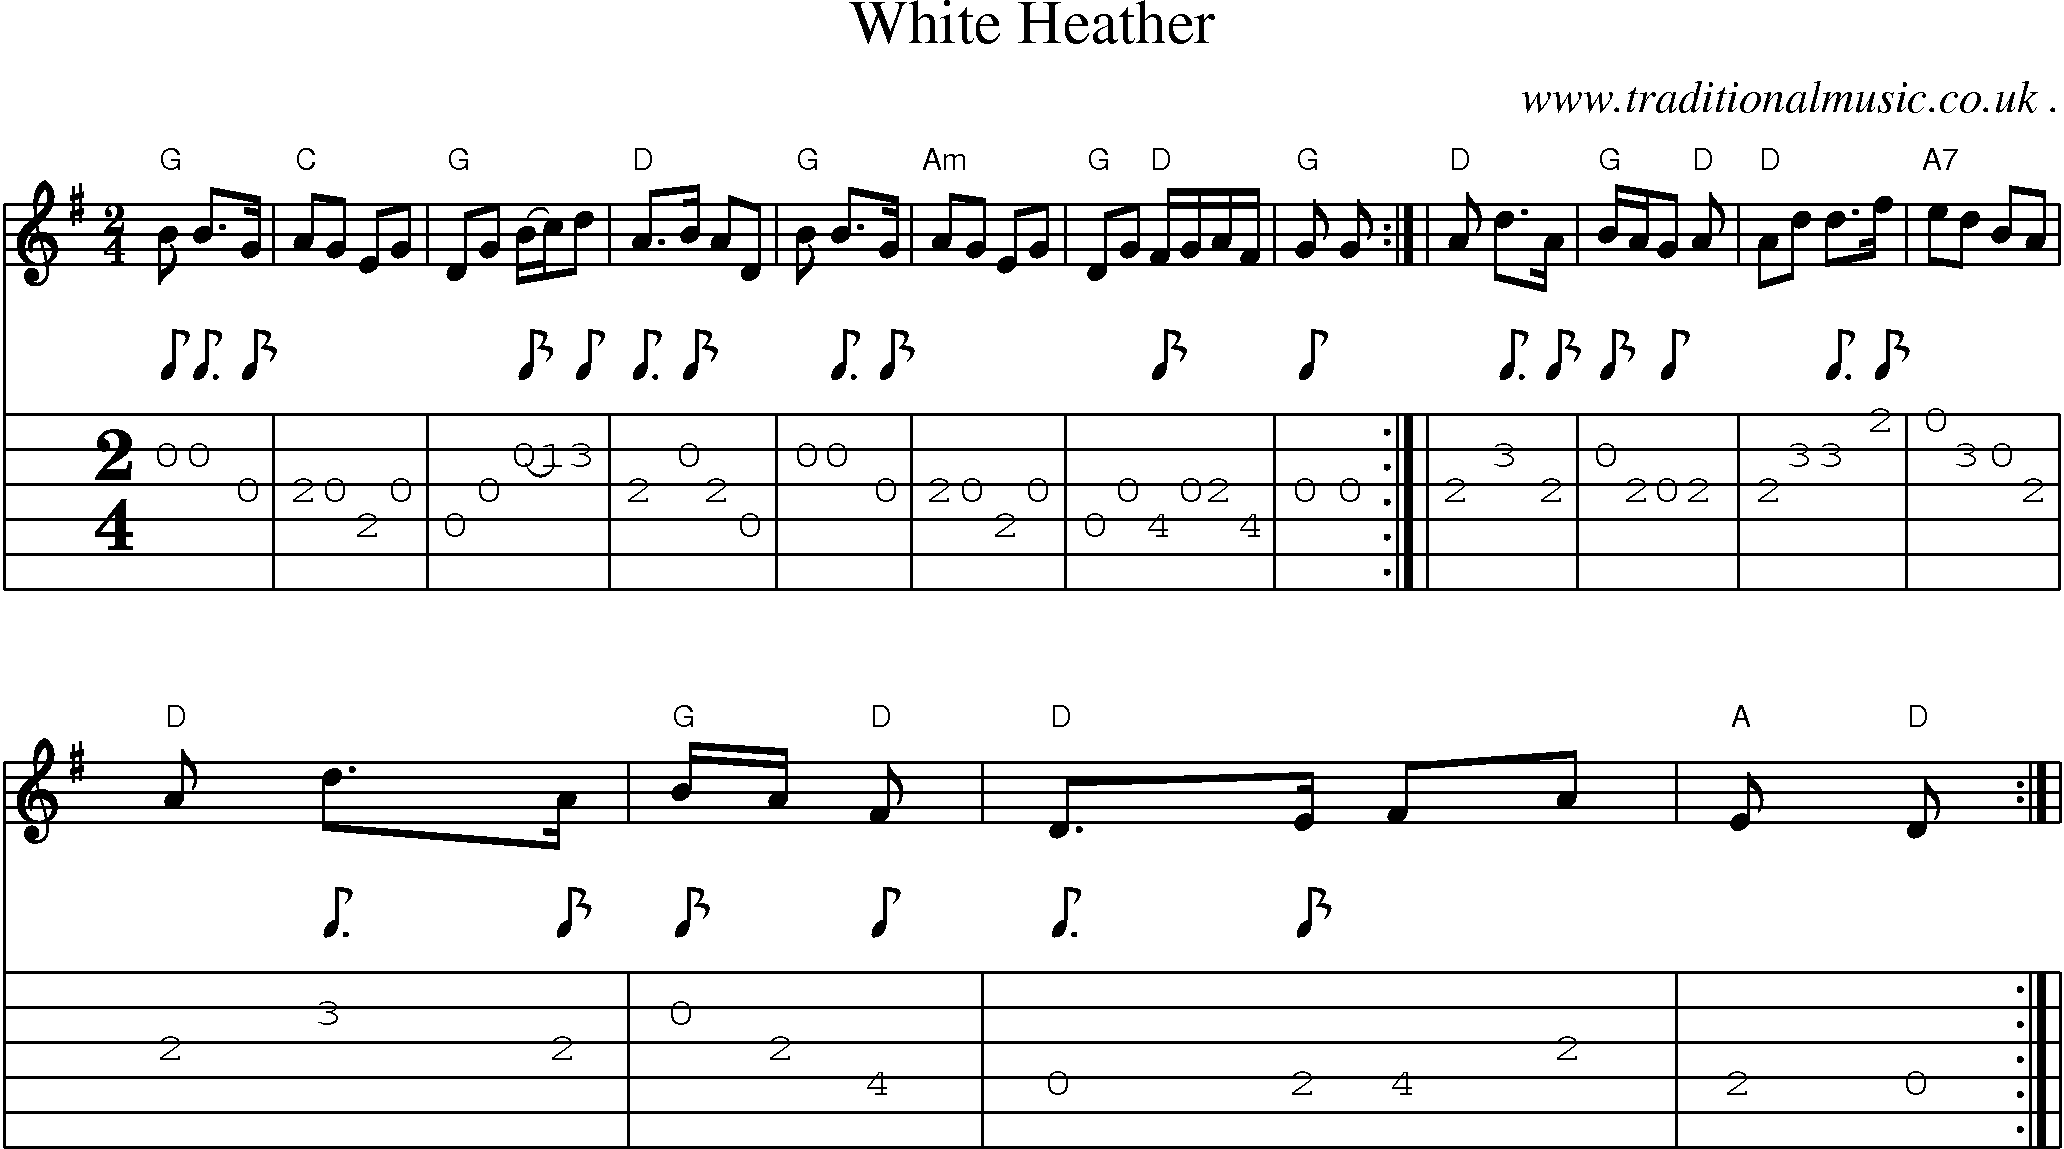 Sheet-music  score, Chords and Guitar Tabs for White Heather